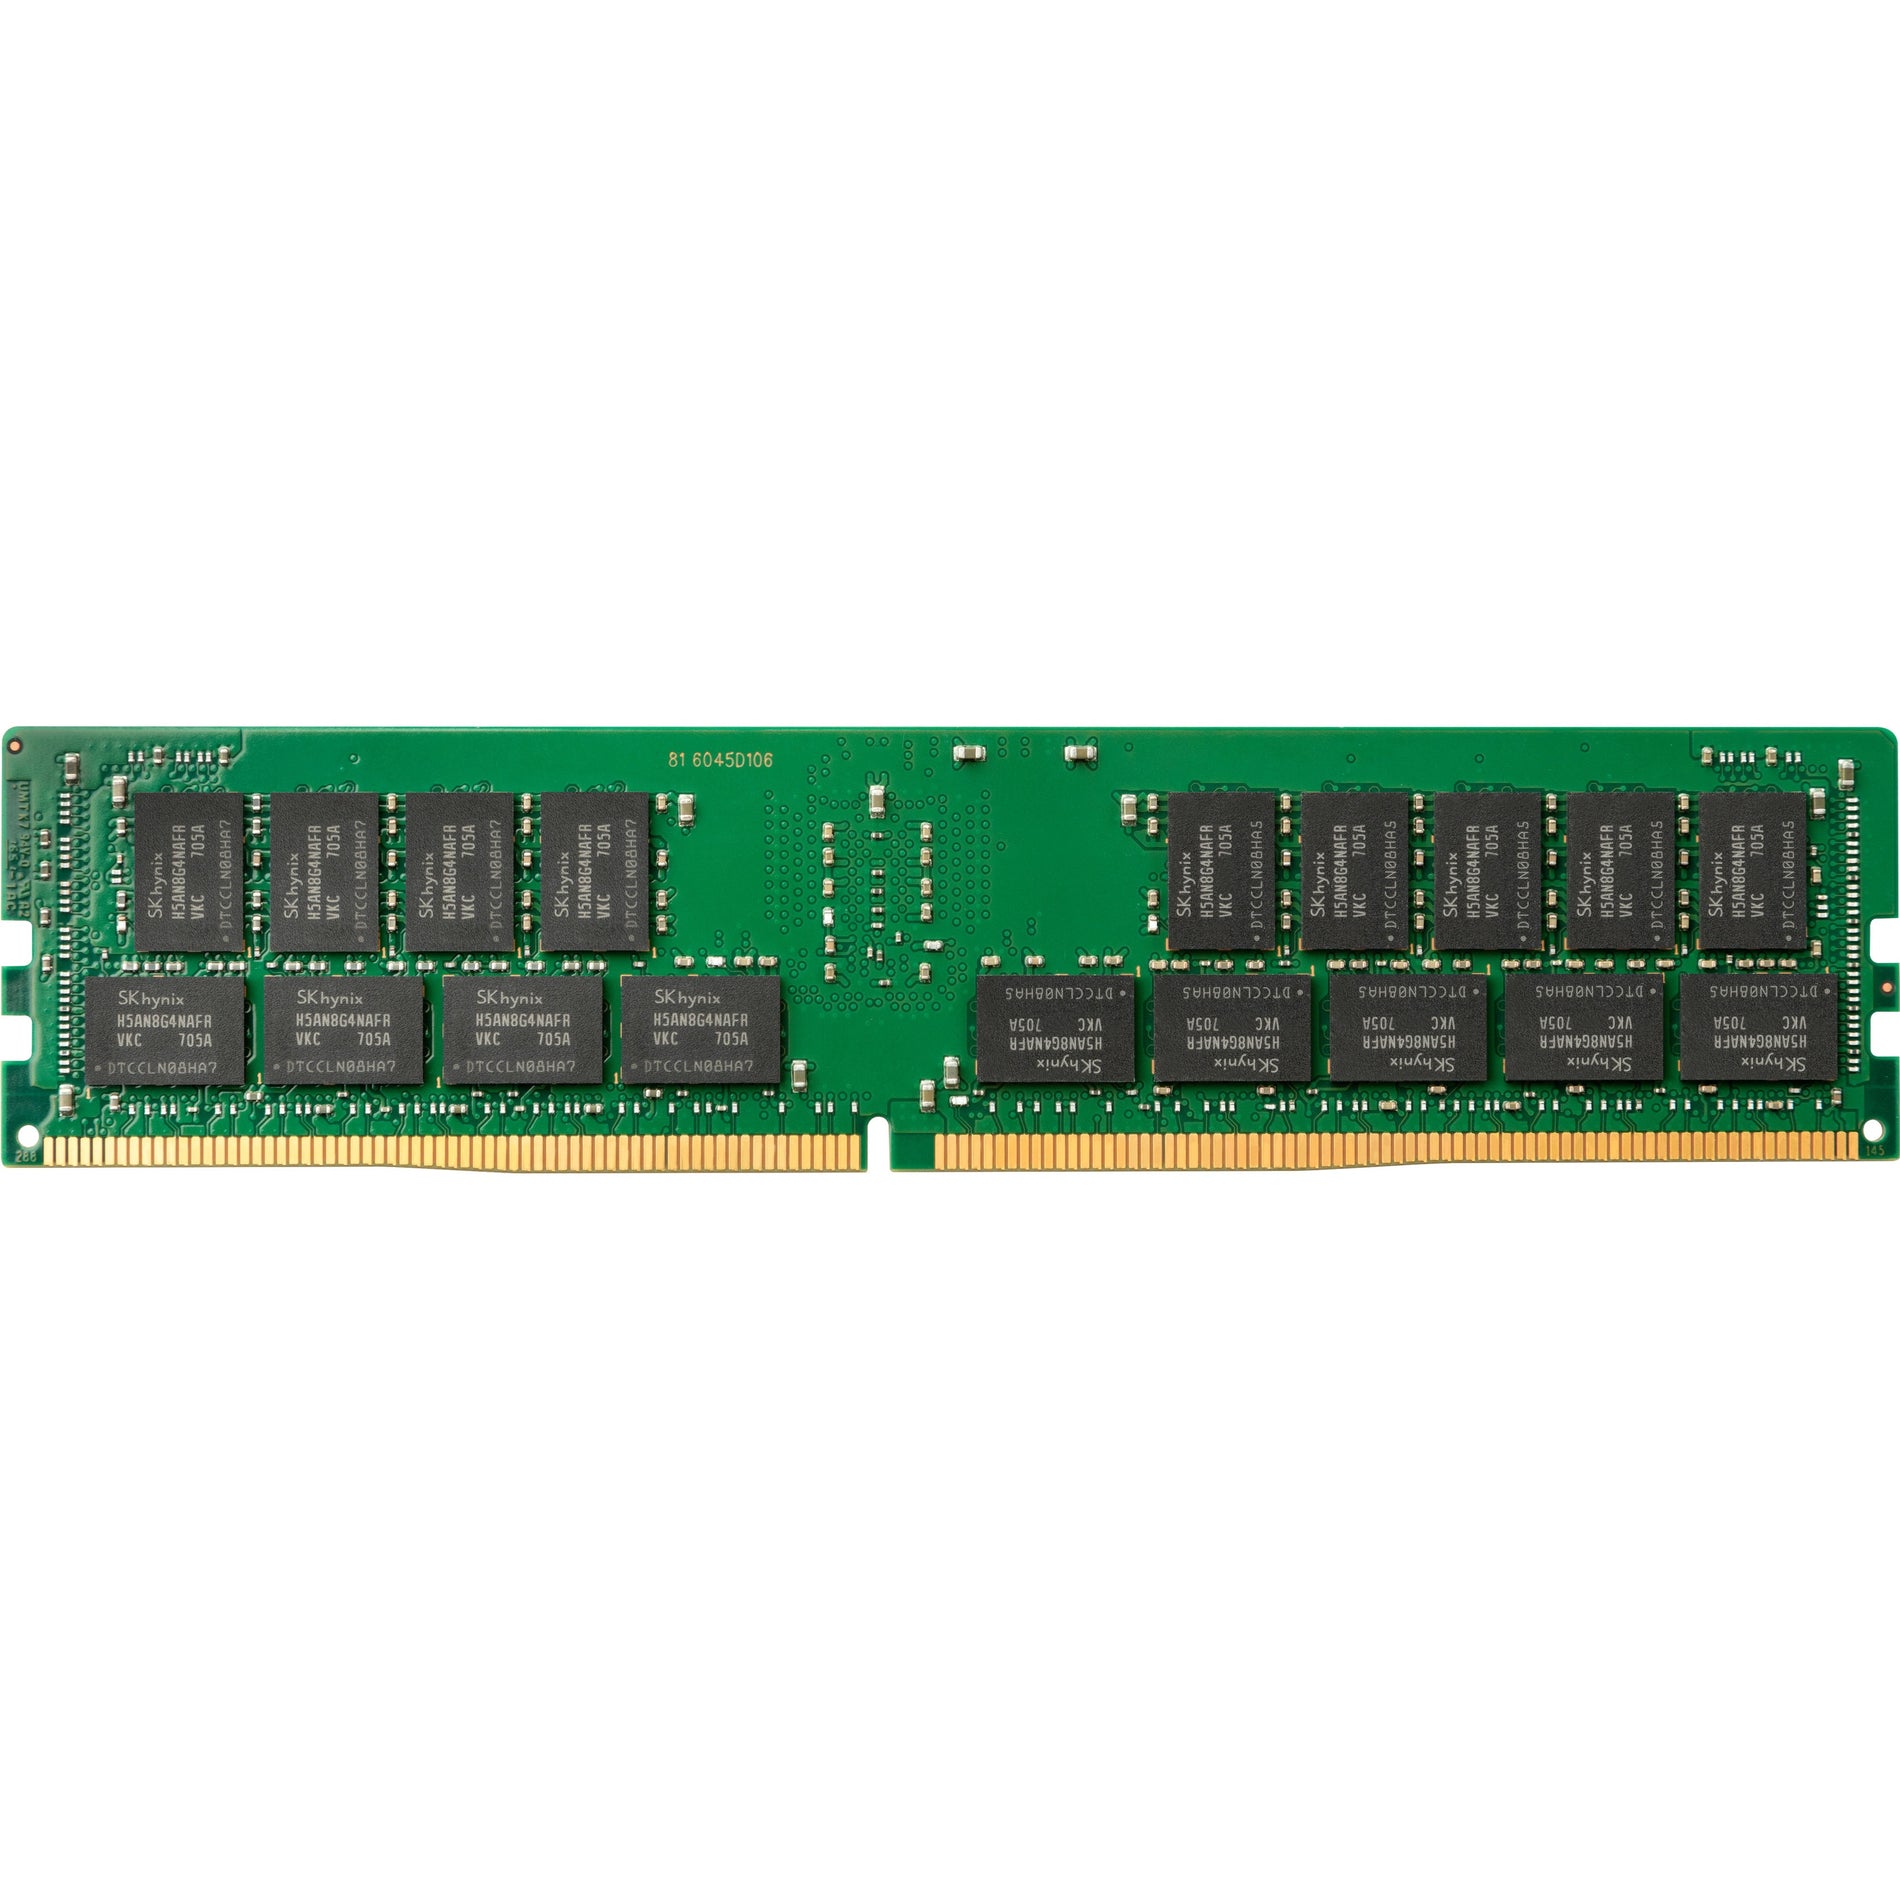 HP 5YZ55AT 32GB DDR4 SDRAM Memory Module, High Performance RAM for HP Workstations